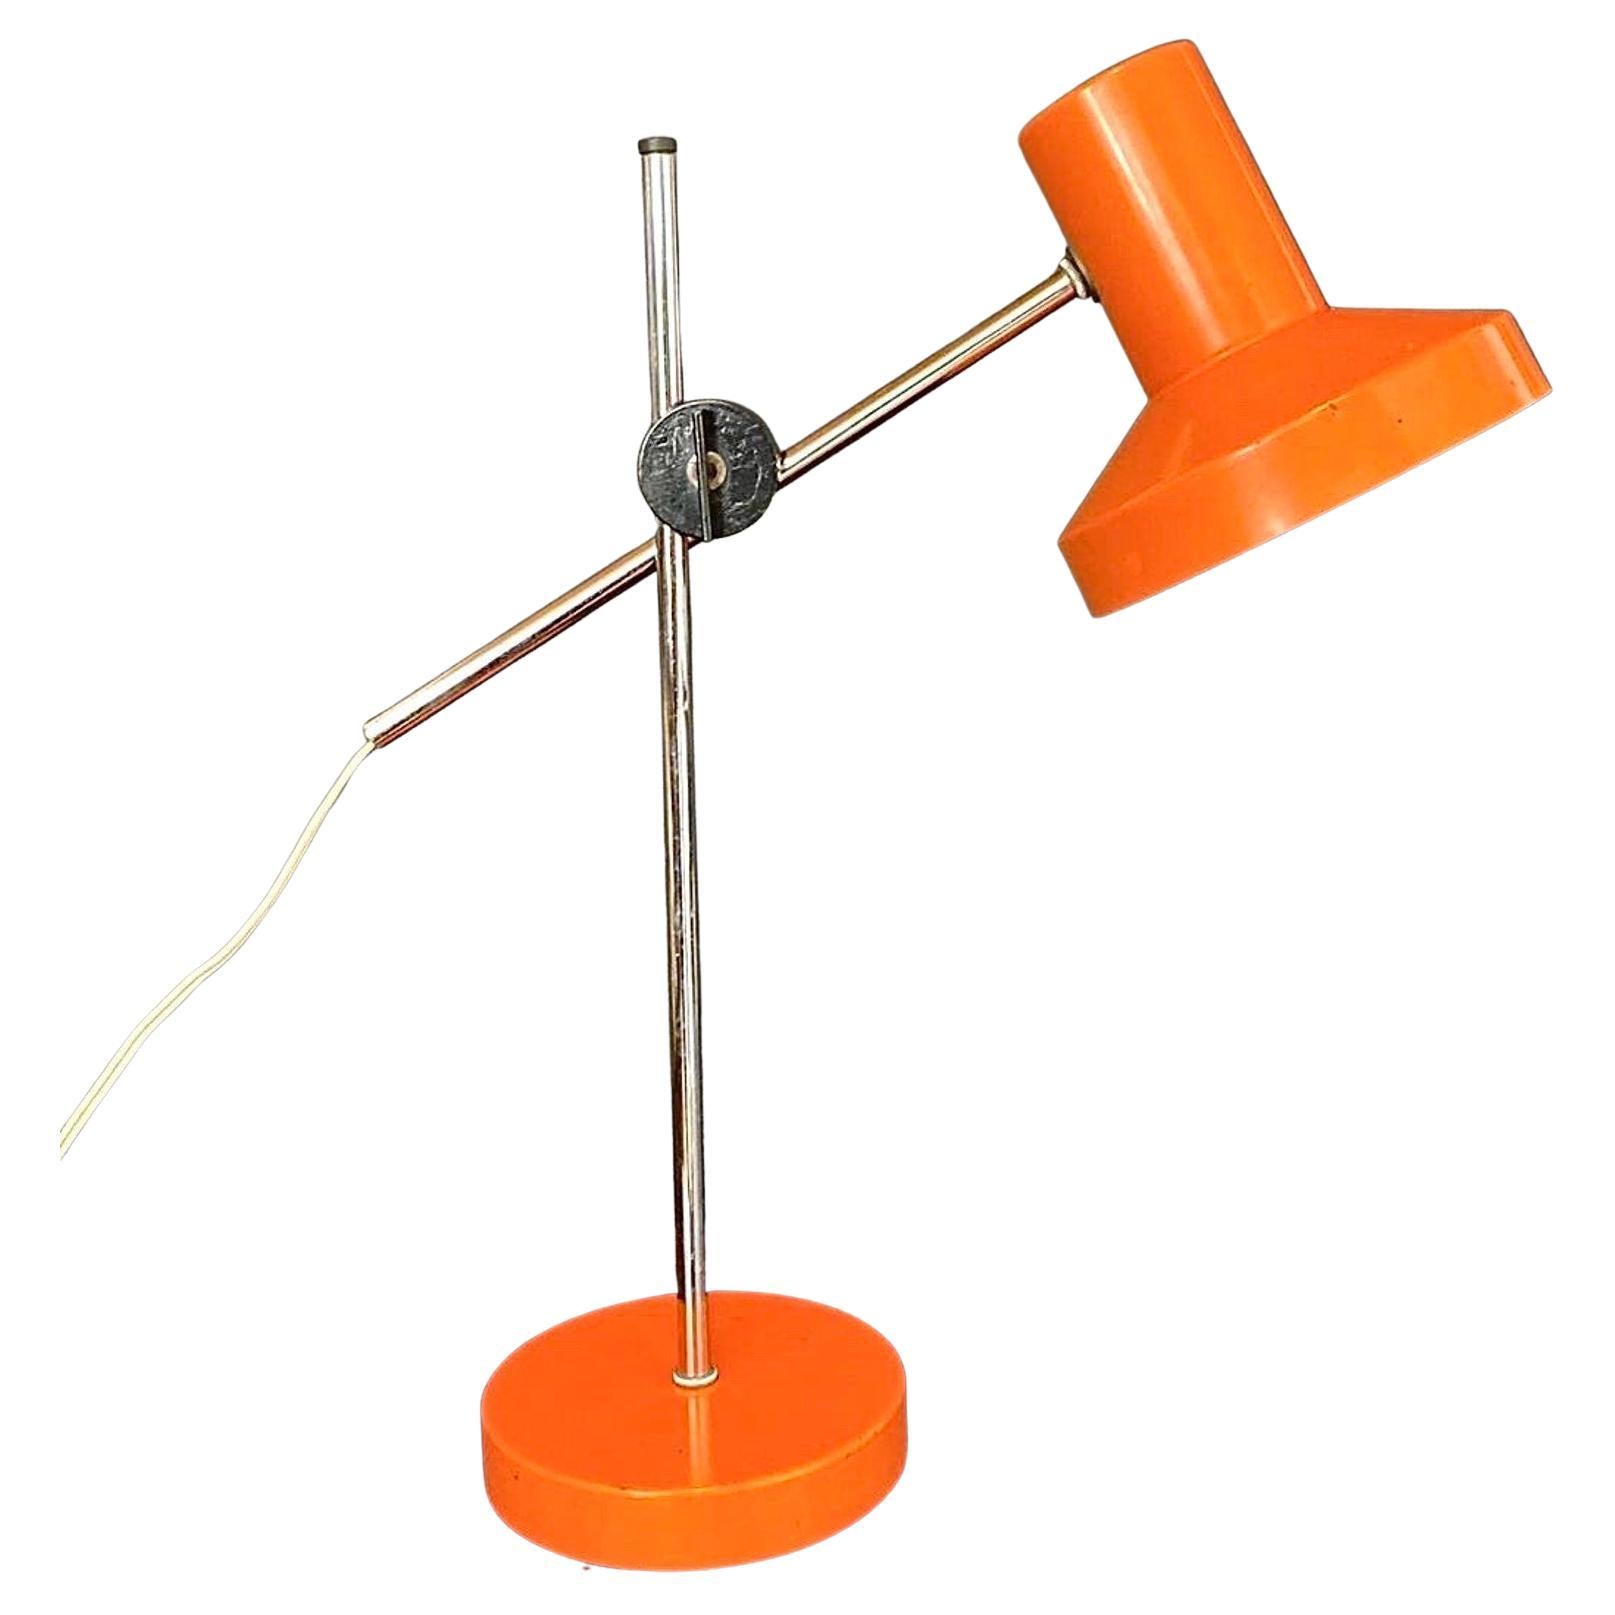 Vintage Table Lamp 50s Style Lamp Orange Table Lamp For Sale